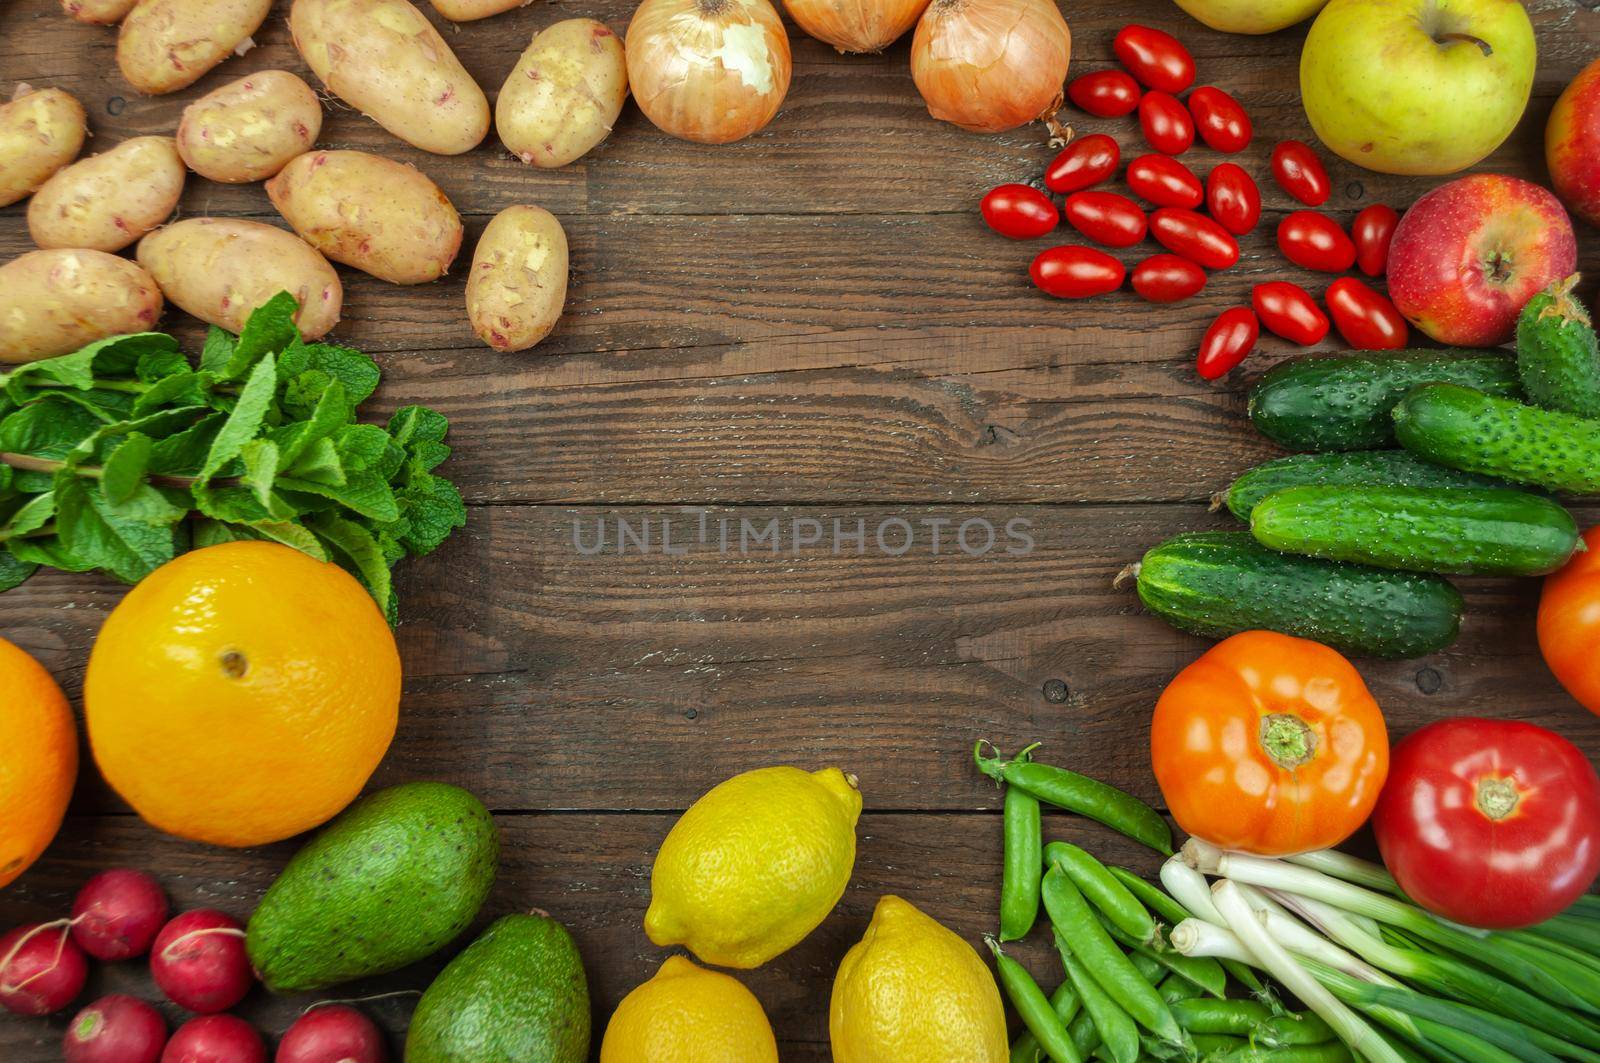 Flexitana diet concept.Composition with assorted fresh organic vegetables and fruits.Place for text.Cucumbers,tomatoes,radish, avocado, peas,potatoes,lemon,onions.Food on dark wooden background.